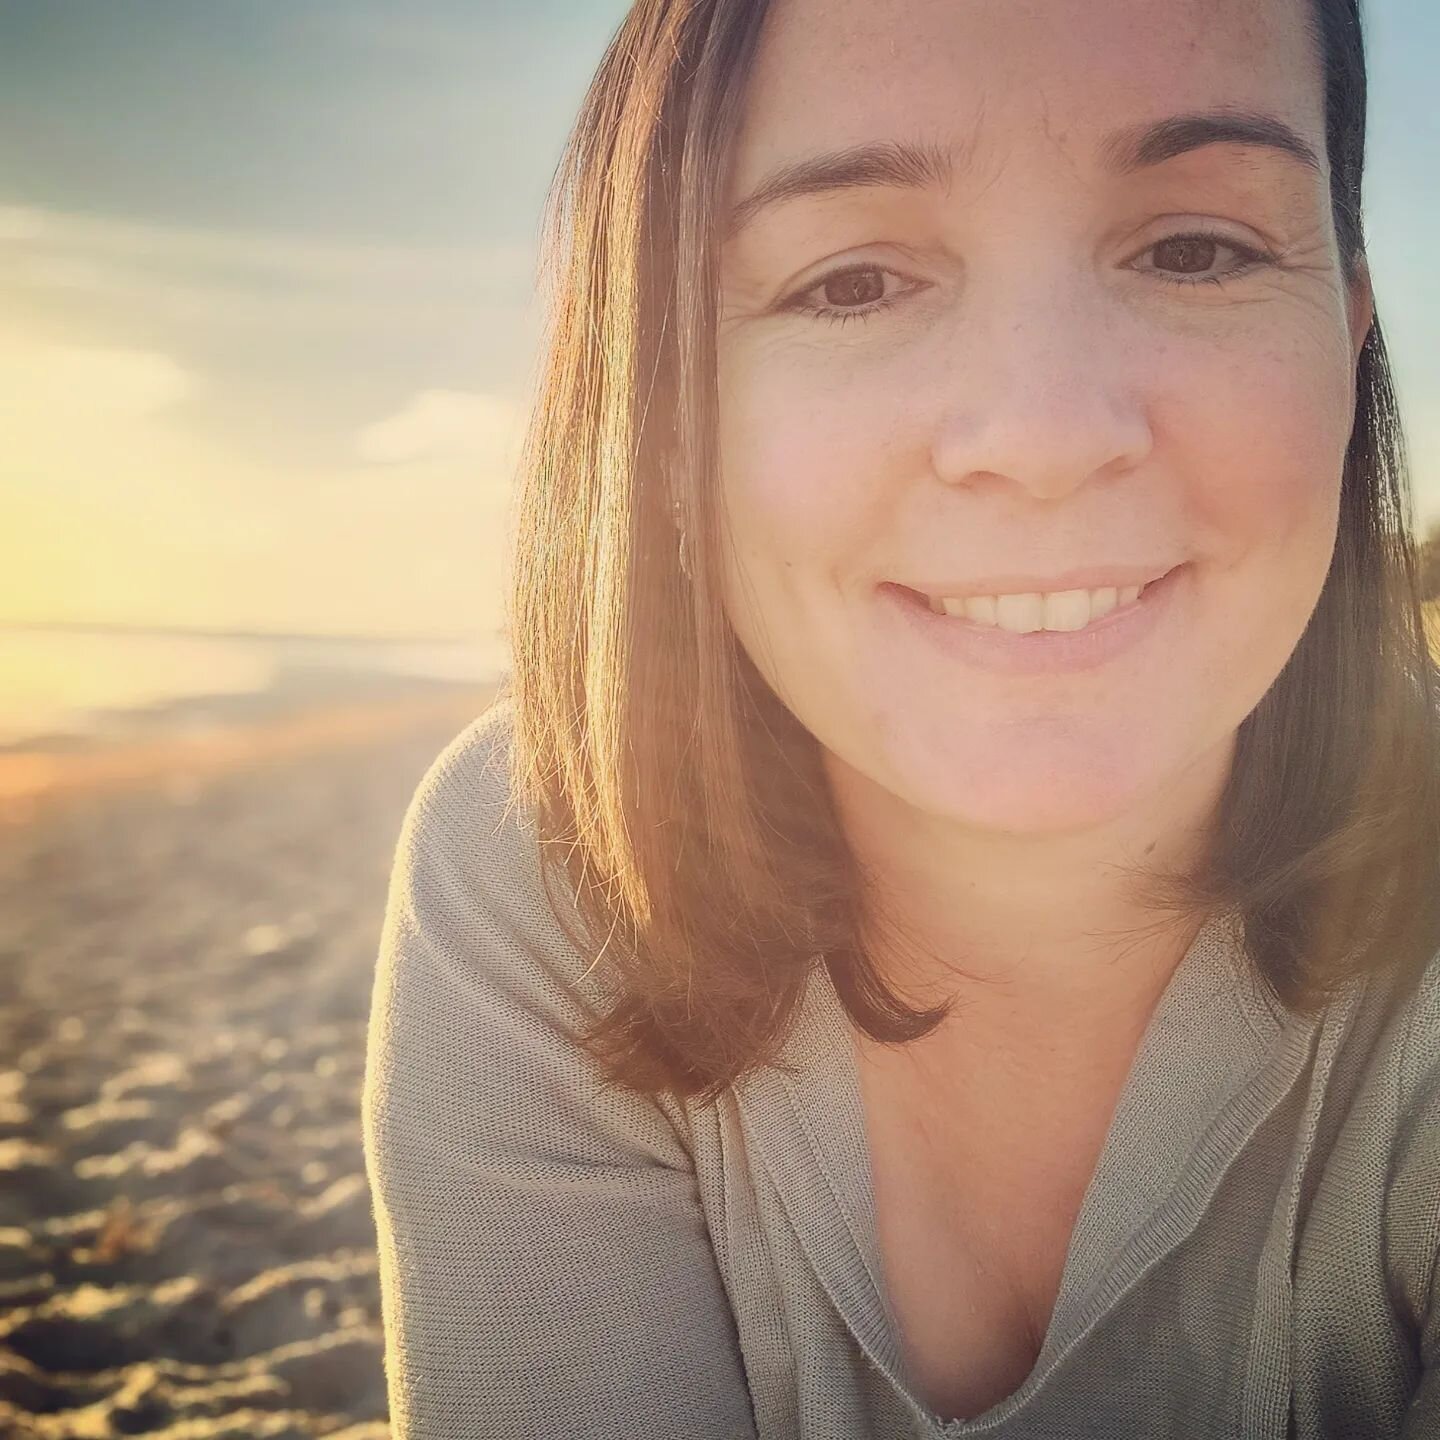 Hi! I'm Megan. 
Welcome to my page 👋
I have just recently completed my Hypnobirthing Australia Practitioner Training so that I can teach the Positive Birth Program to pregnant women and their support people. 
My passion is educating women! I've love